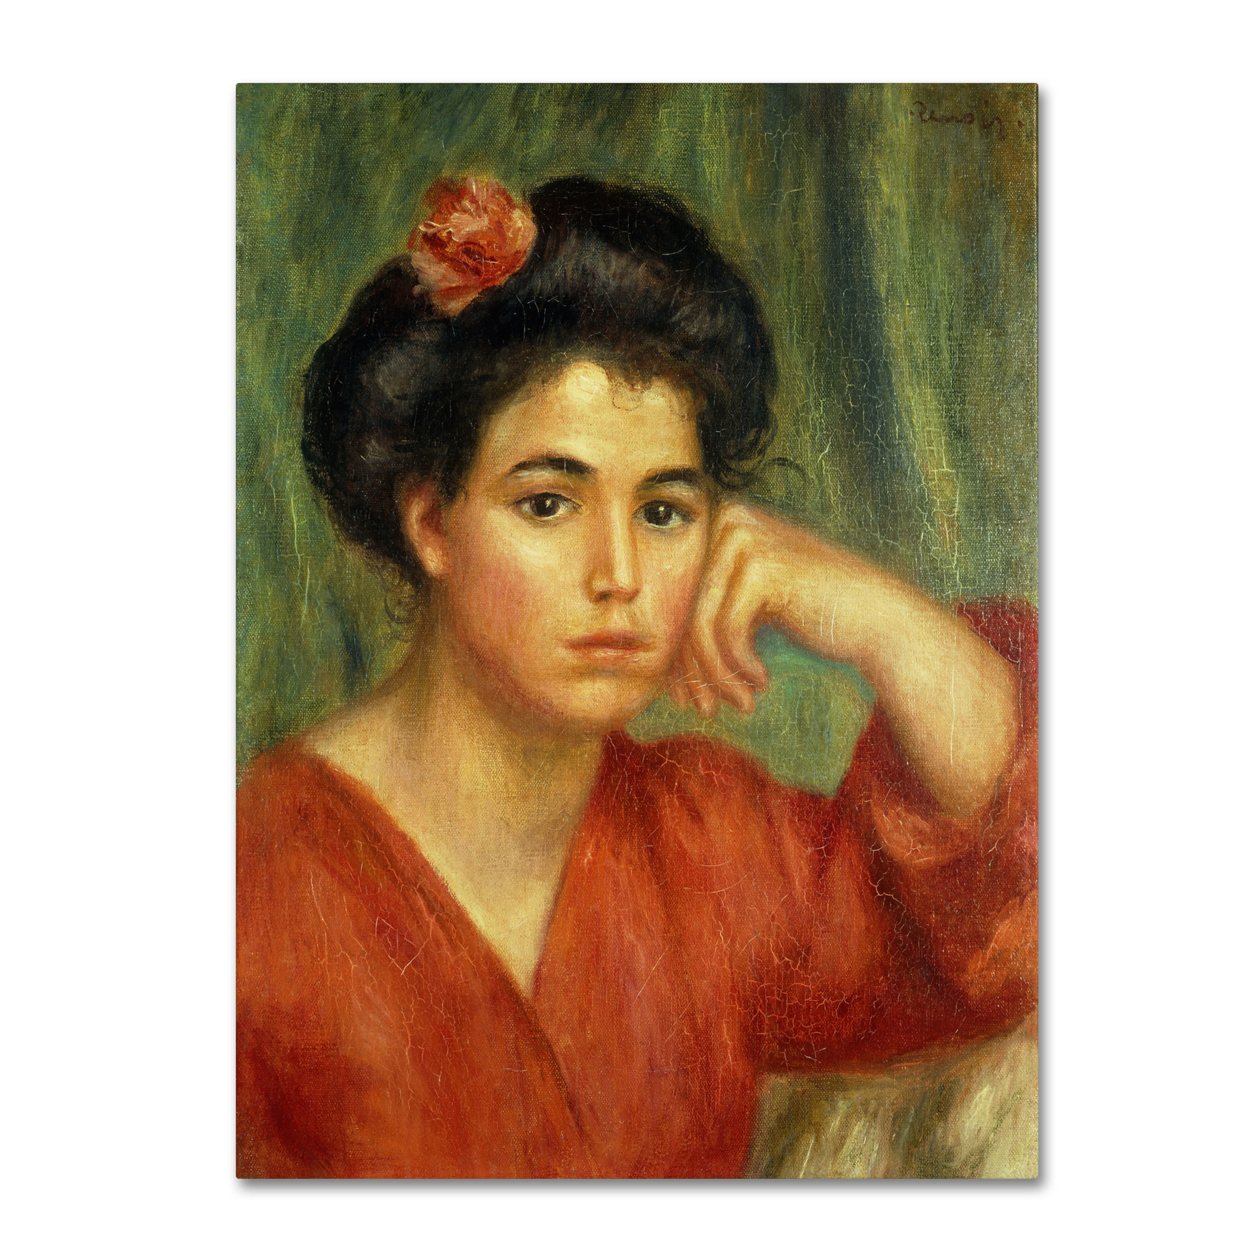 Pierre Renoir 'Young Woman With A Rose 1907' Canvas Art 18 X 24